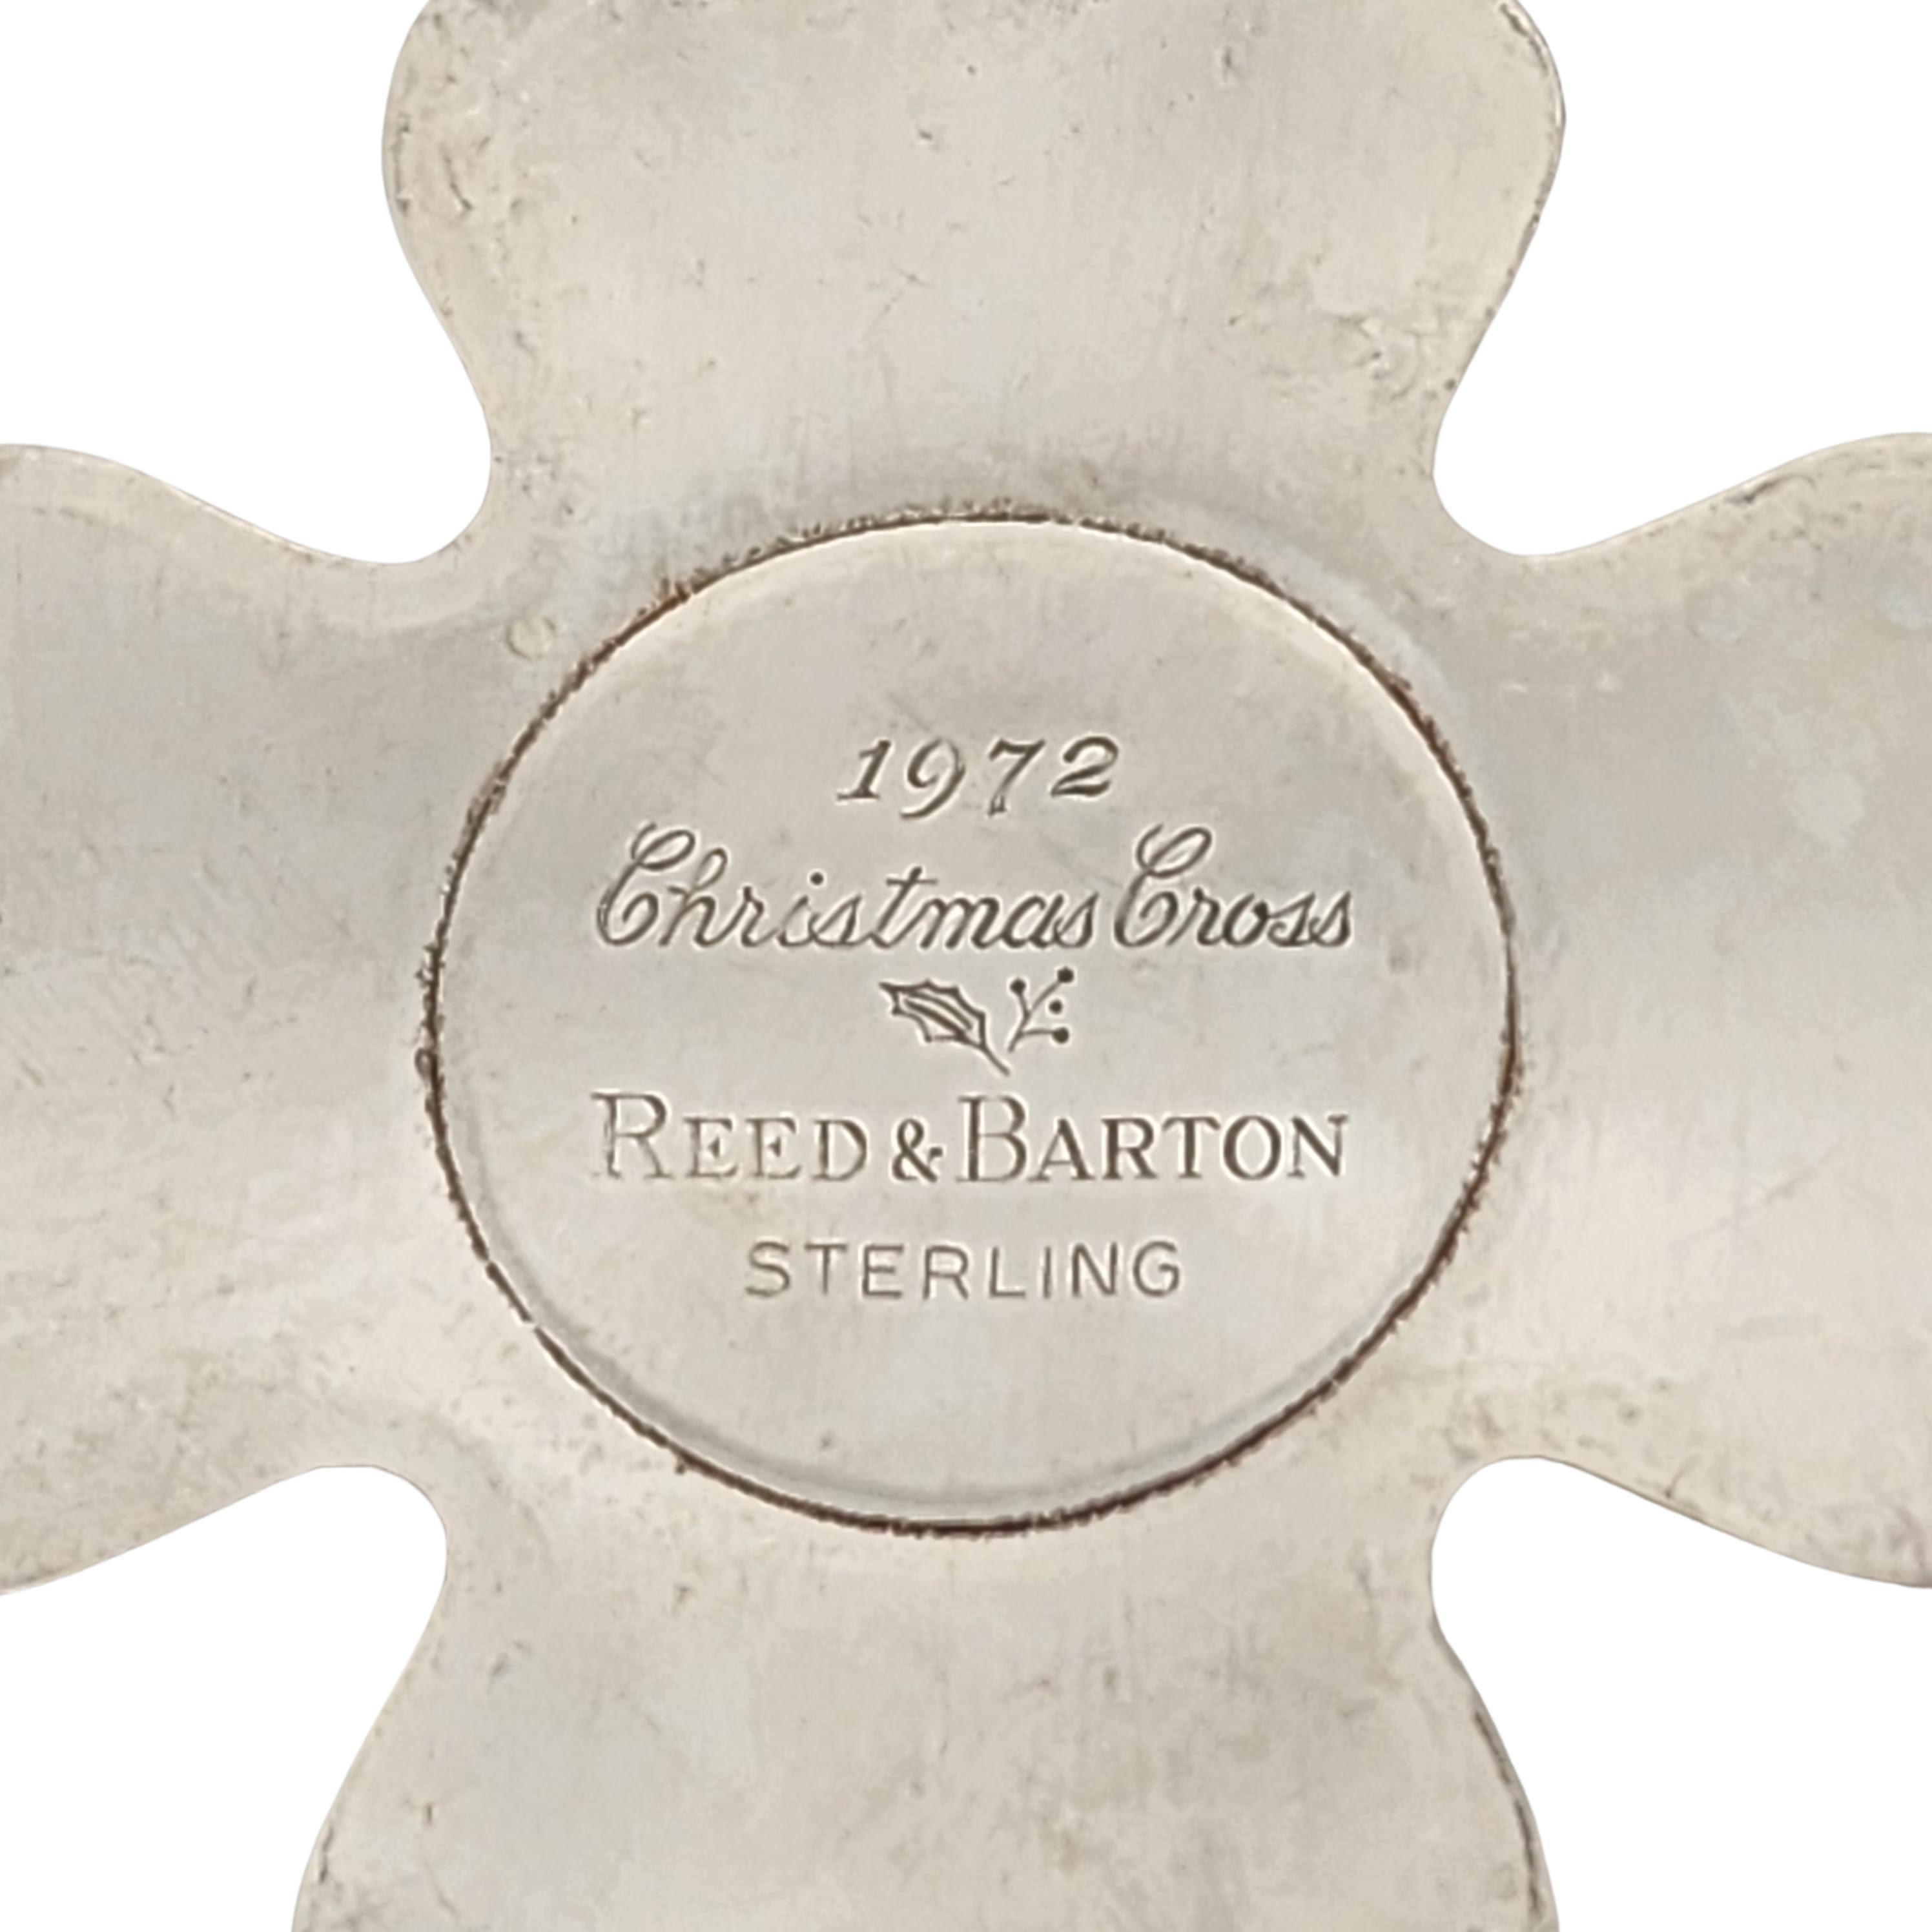 1972 Reed & Barton Sterling Silver Christmas Cross Ornament #15648 1